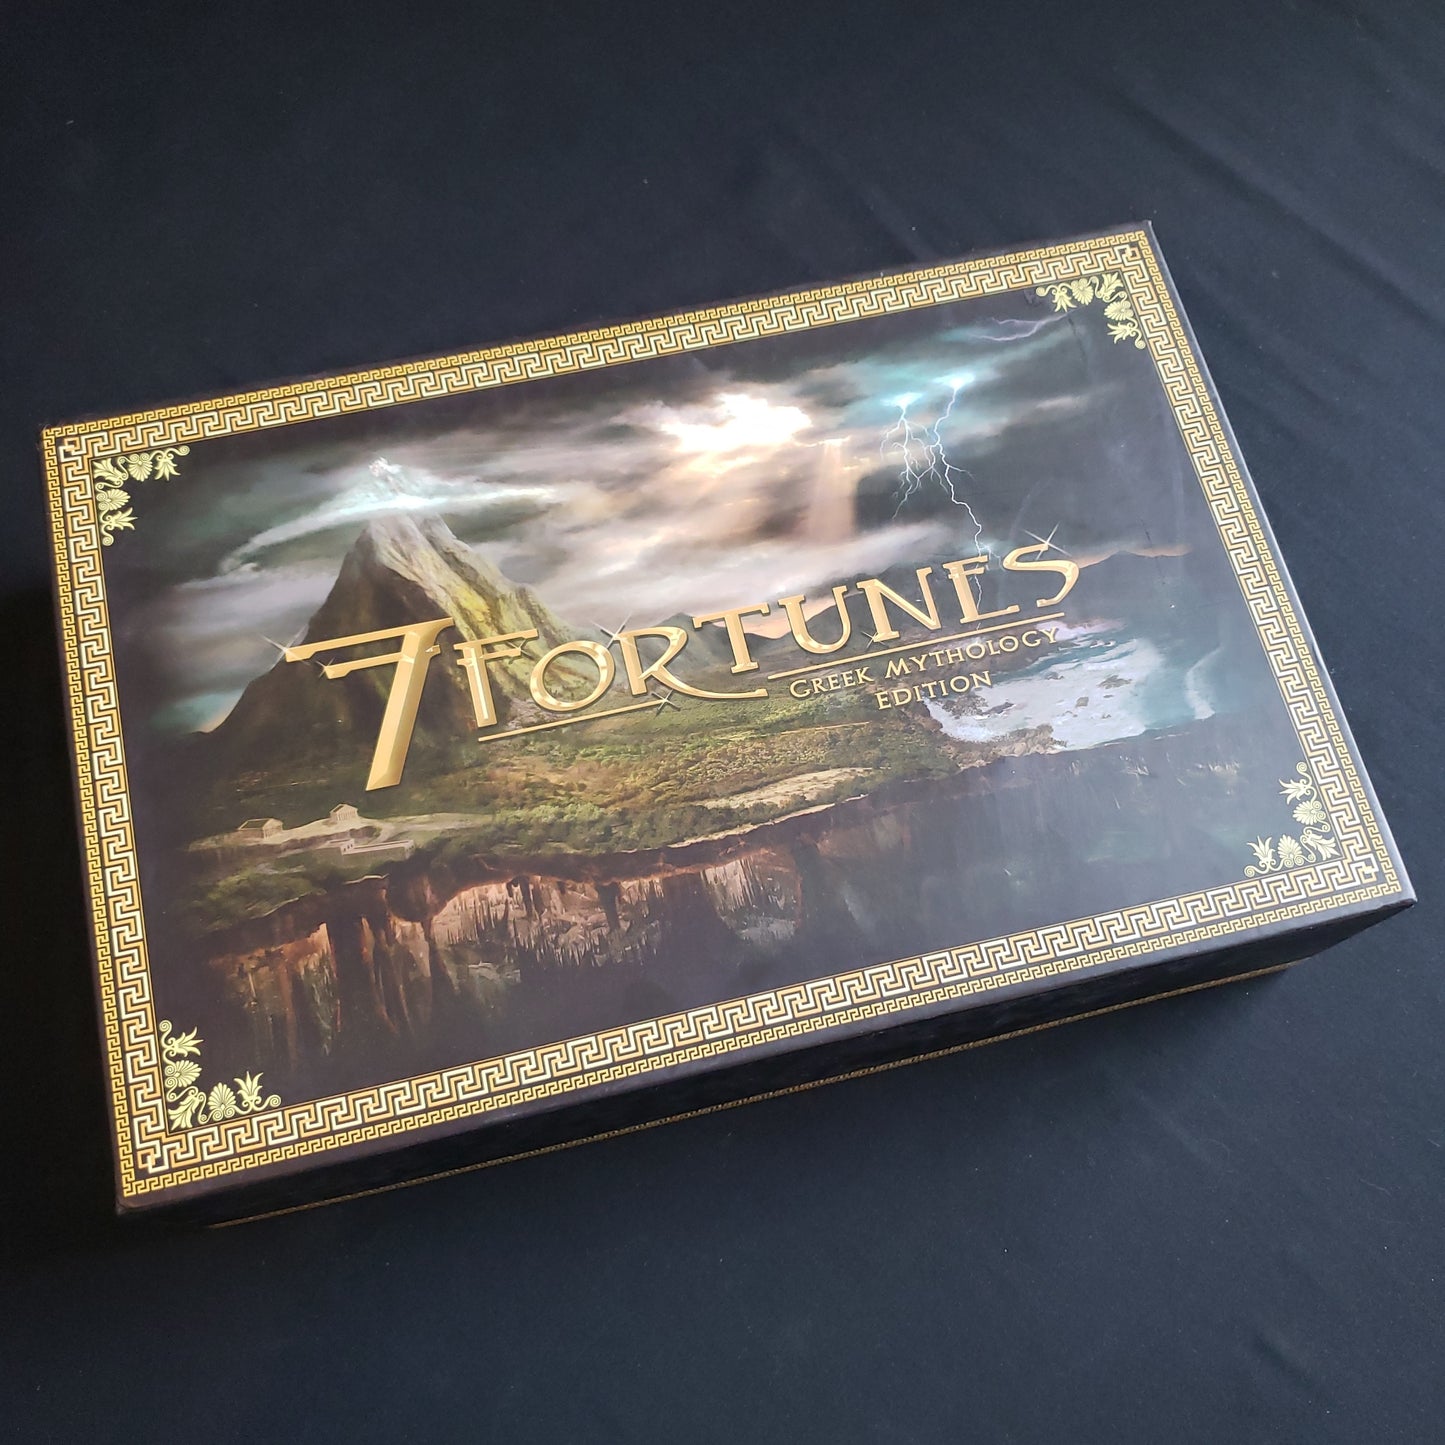 Image shows the front cover of the box of the Greek Mythology Edition of the board game 7 Fortunes